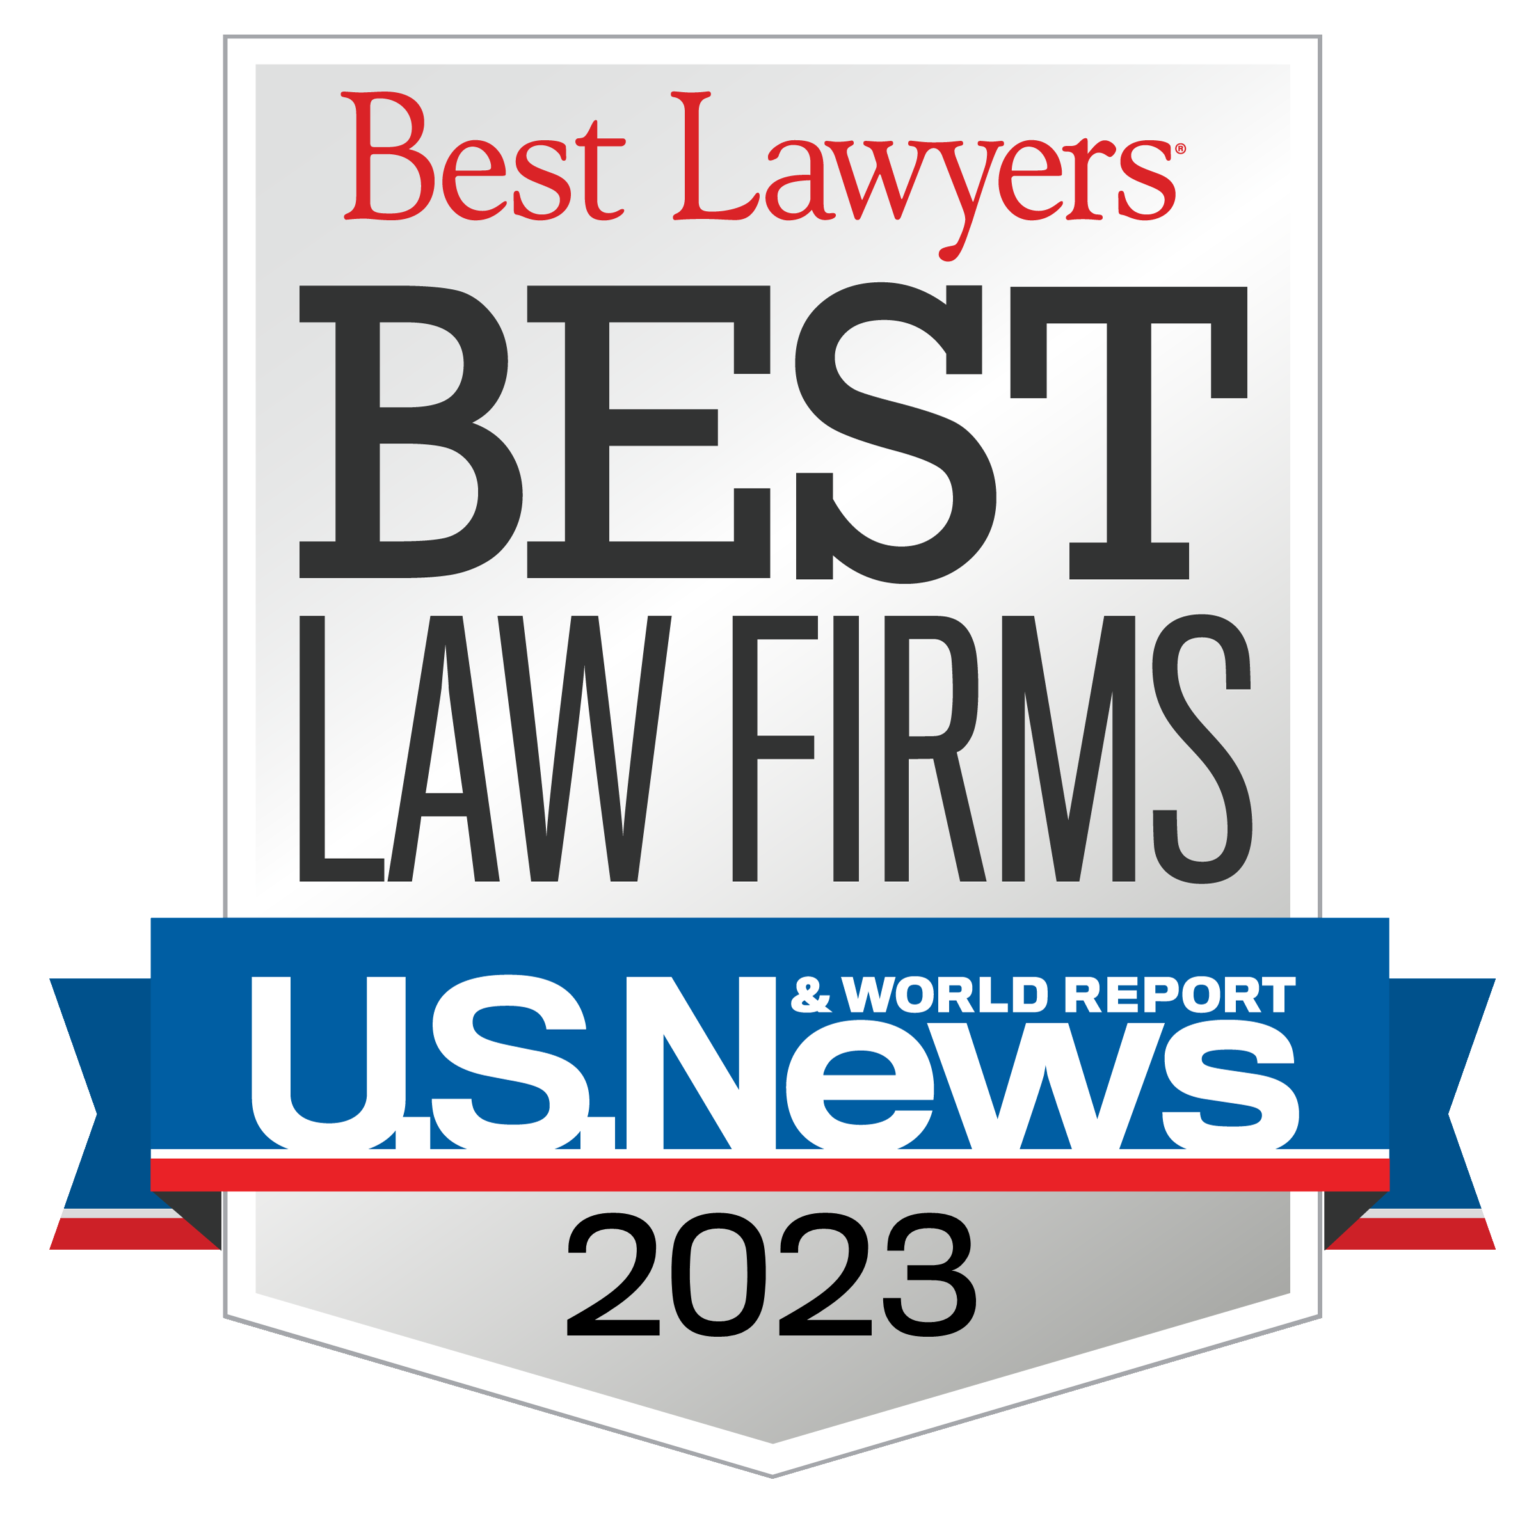 US News/Best Lawyers Best Law Firms 2023 Award Badge